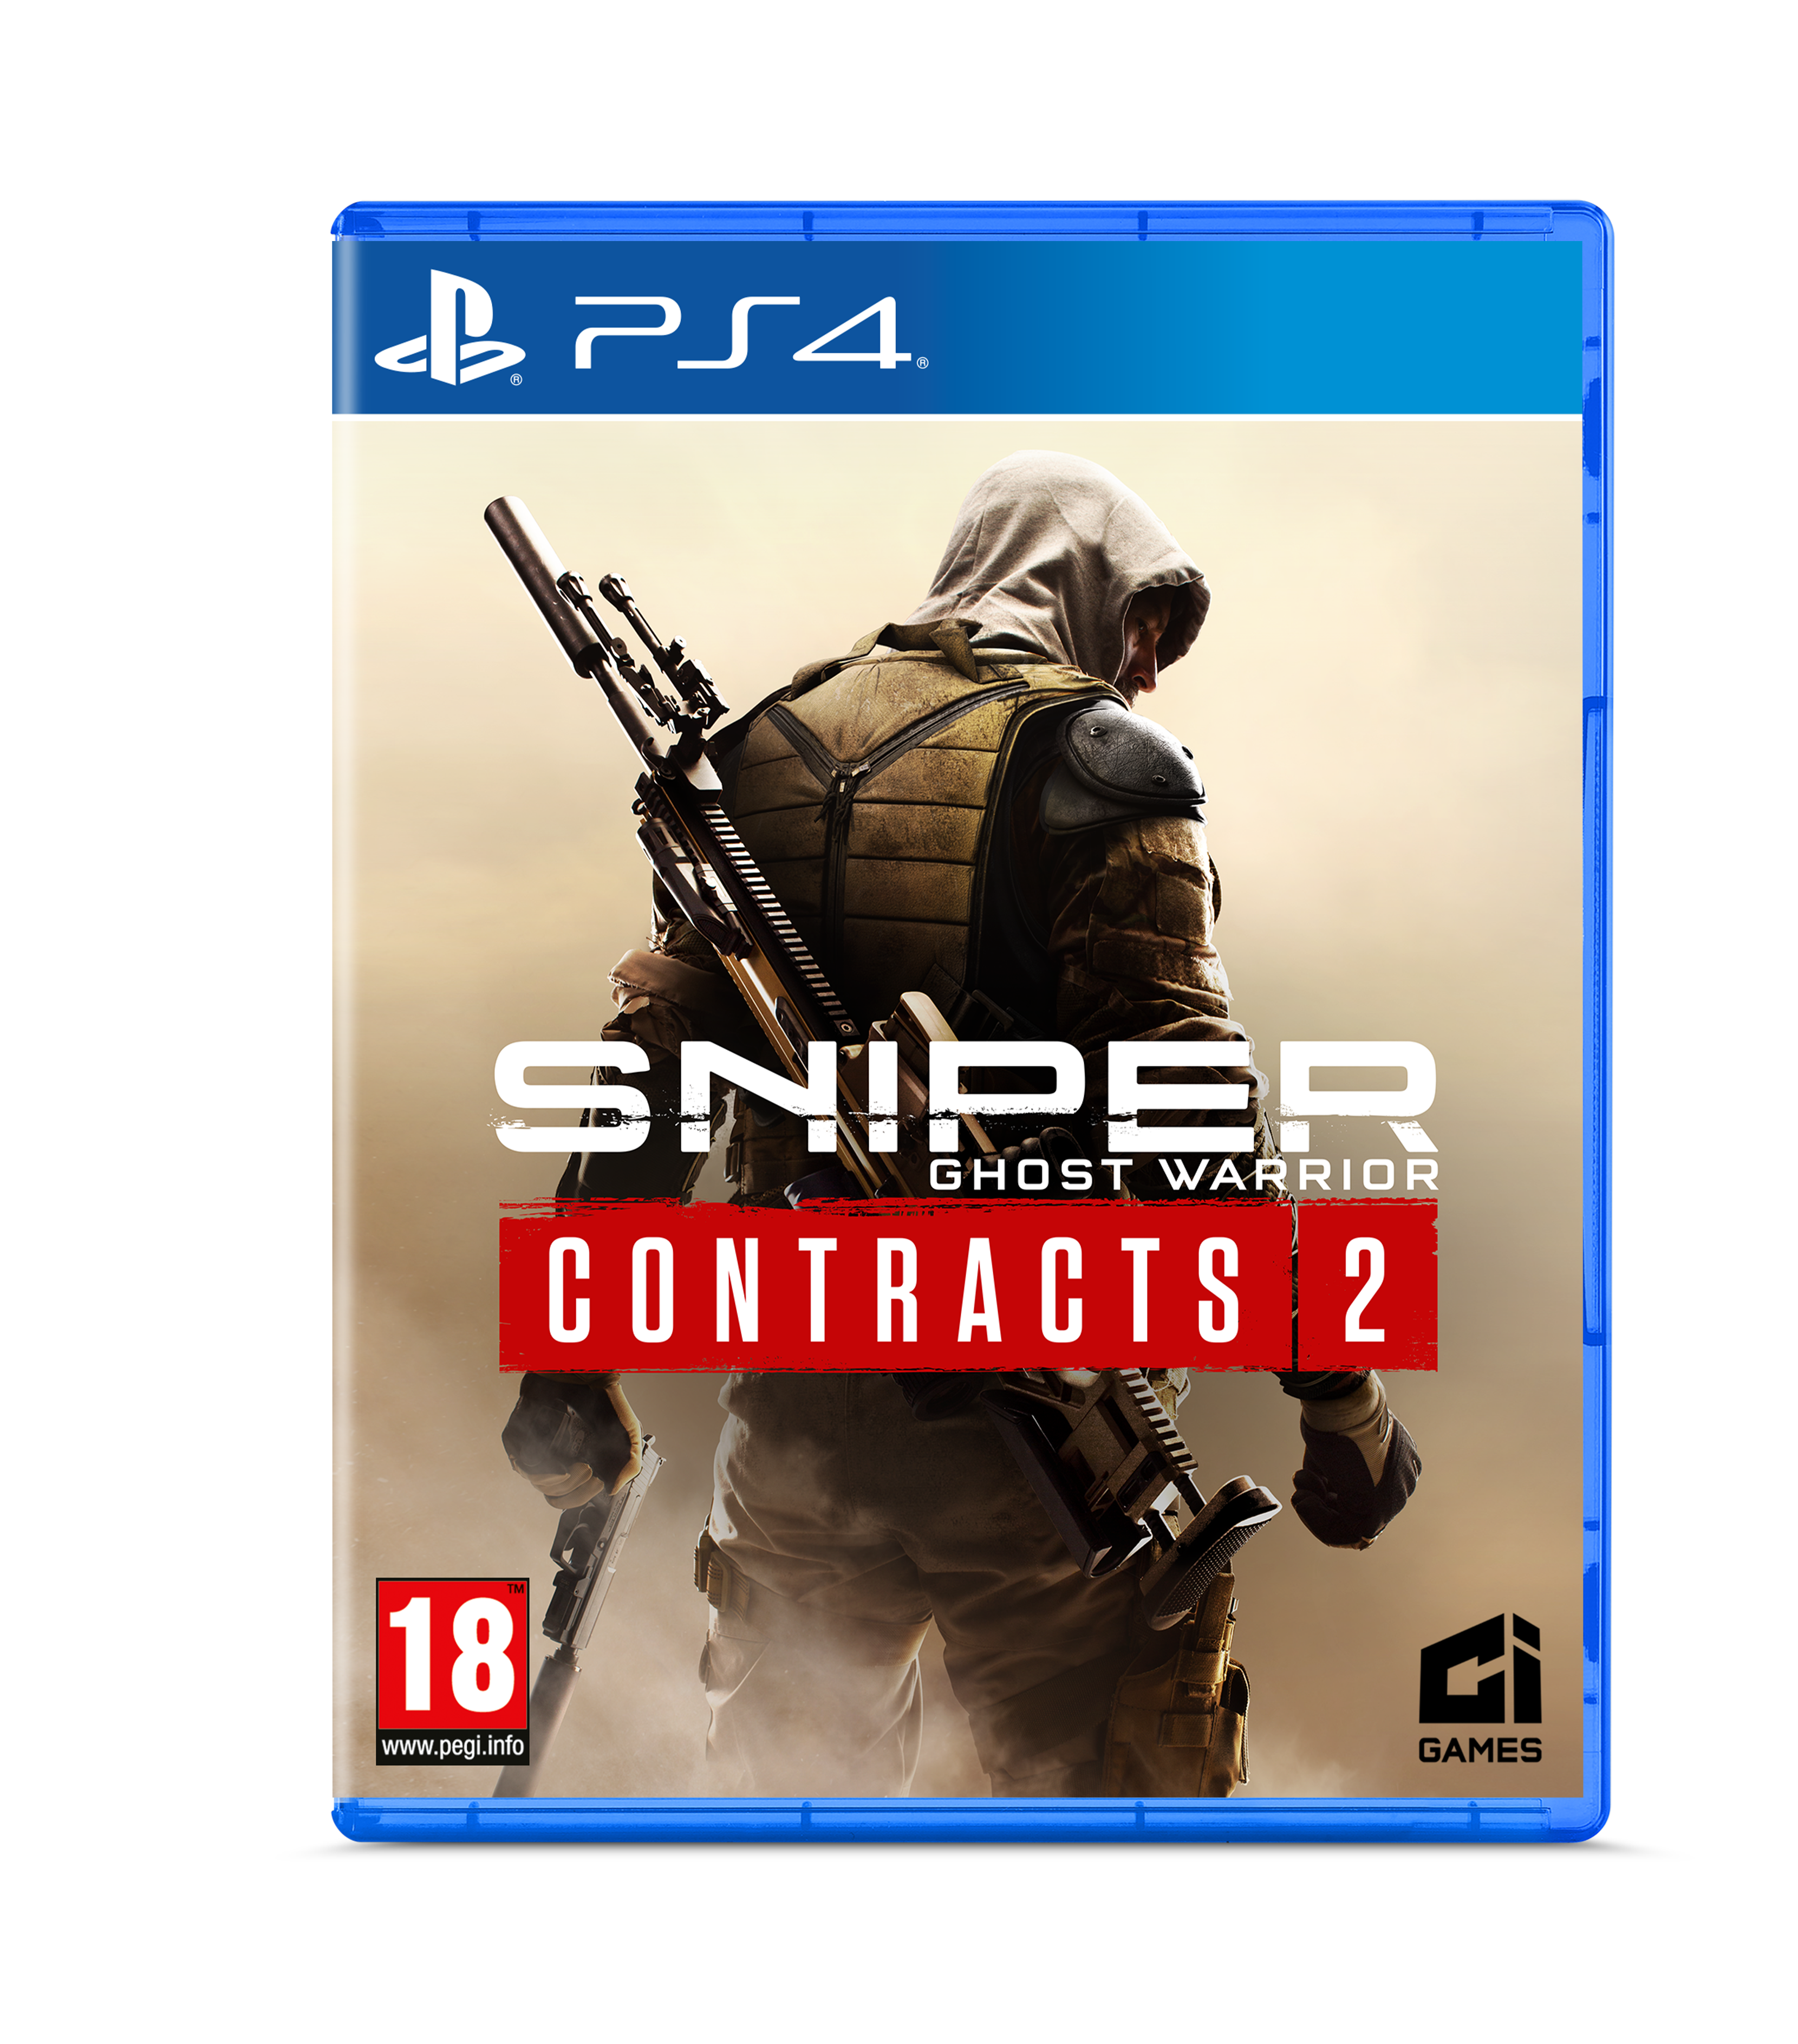 sniper ghost warrior contracts 1 download free